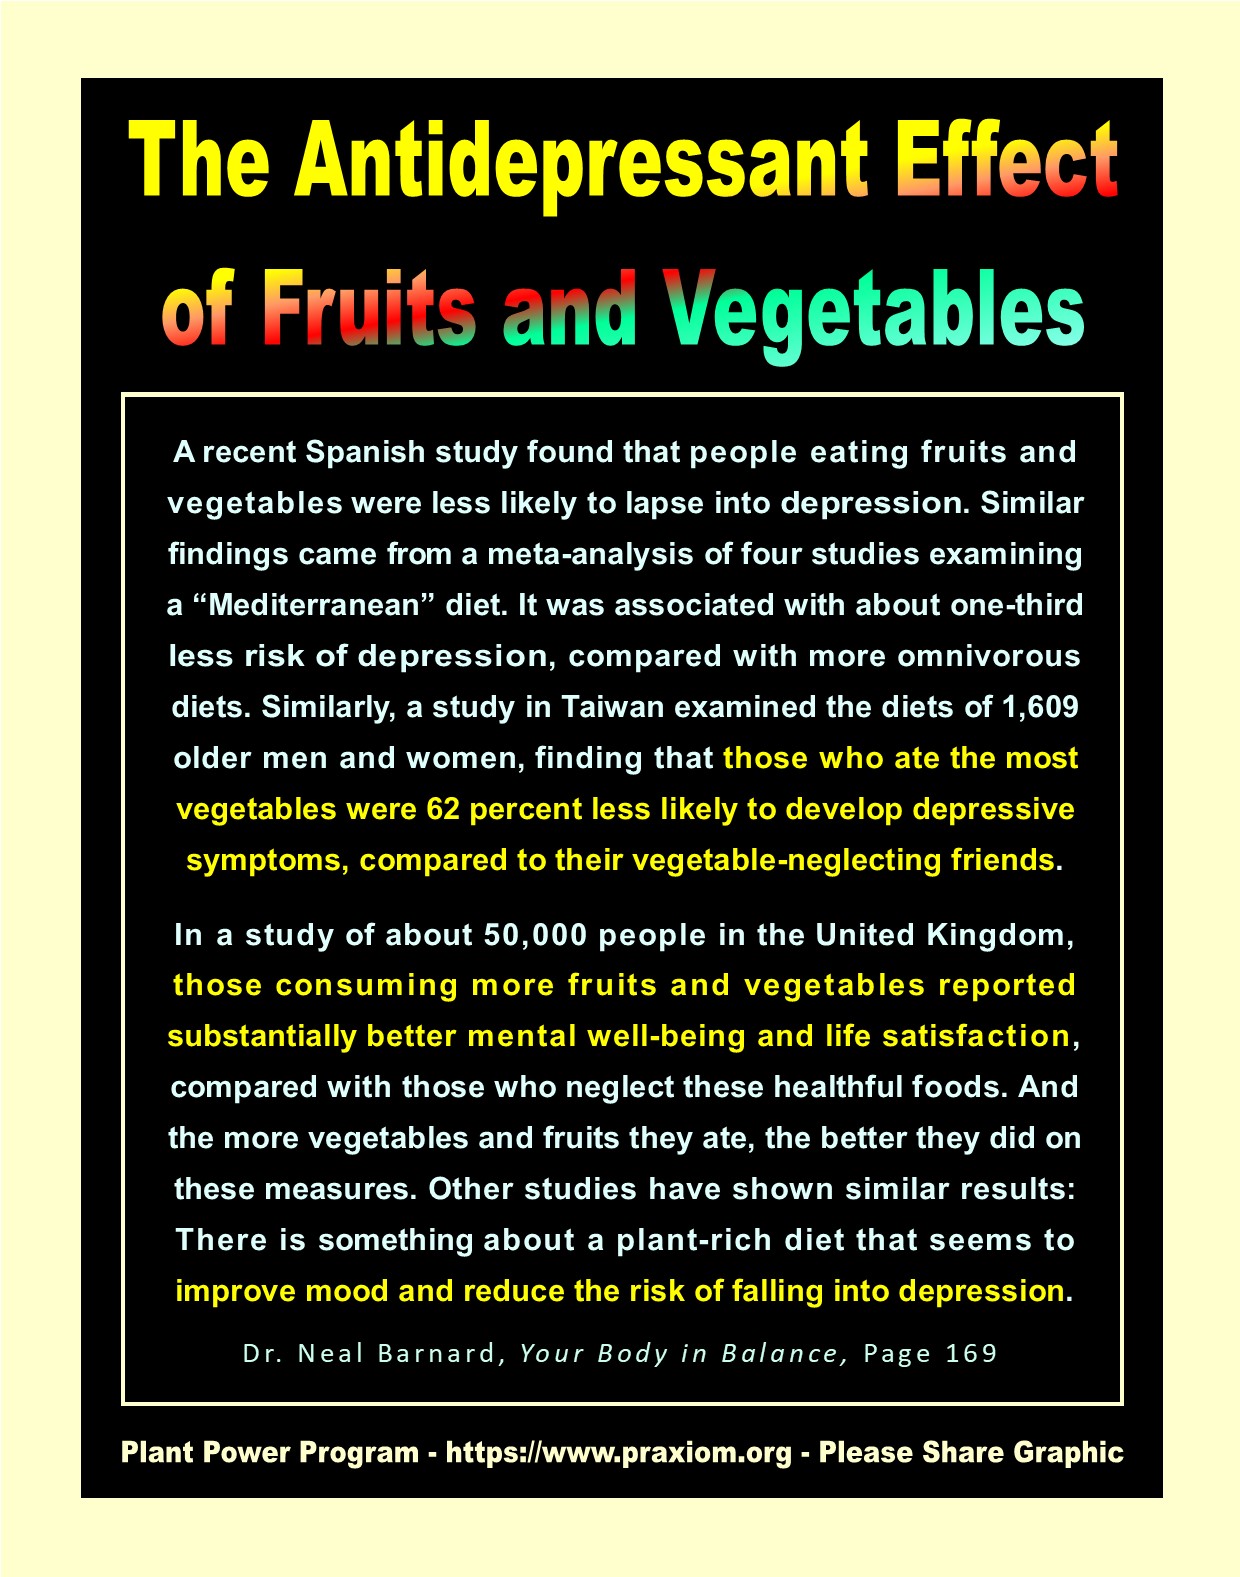 The Antidepressant Effects of Fruits and Vegetables - Dr. Neal Barnard